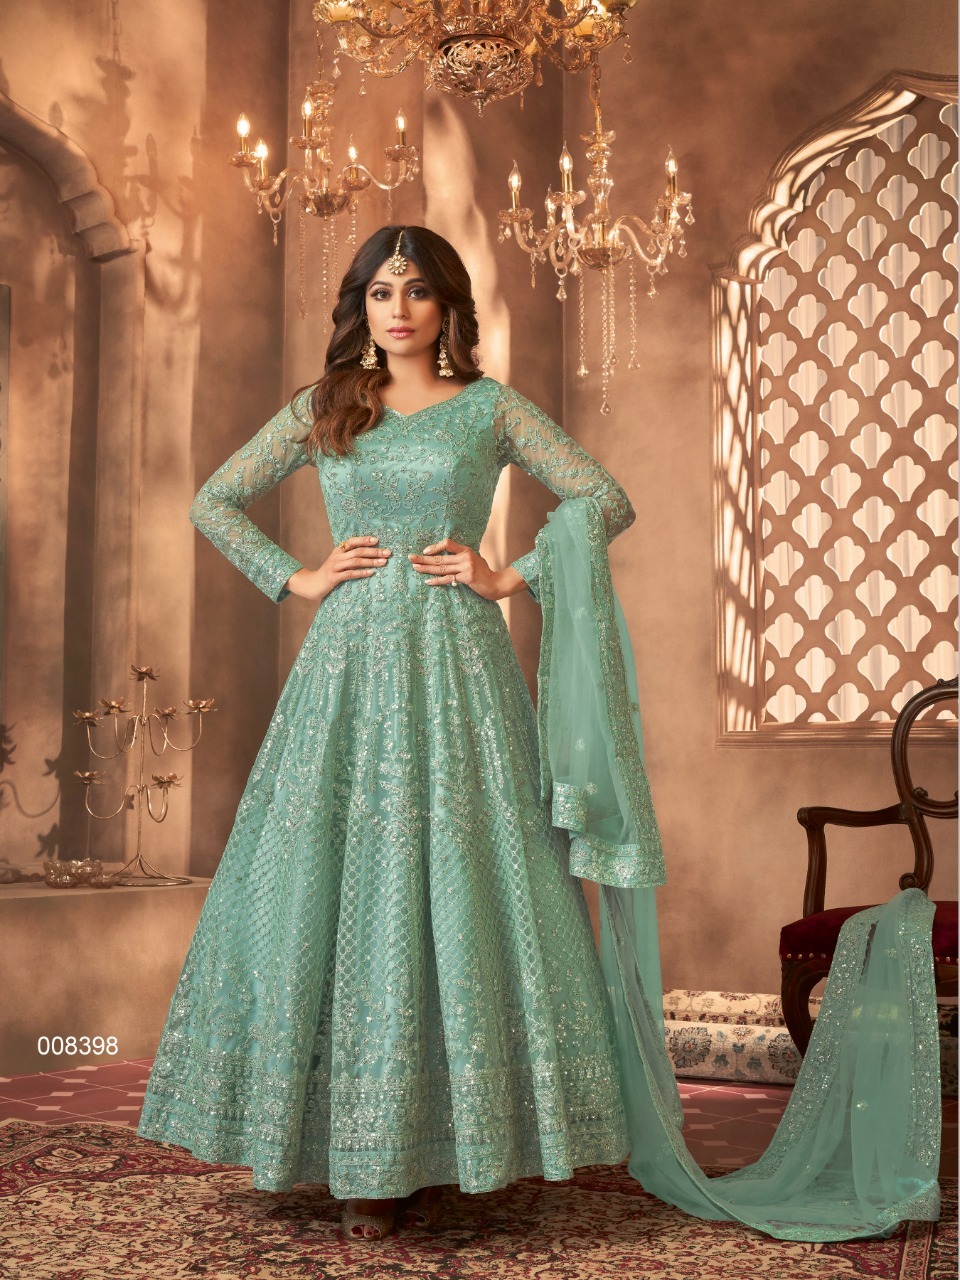 Sky blue and violet pleated gown by The Anarkali Shop | The Secret Label